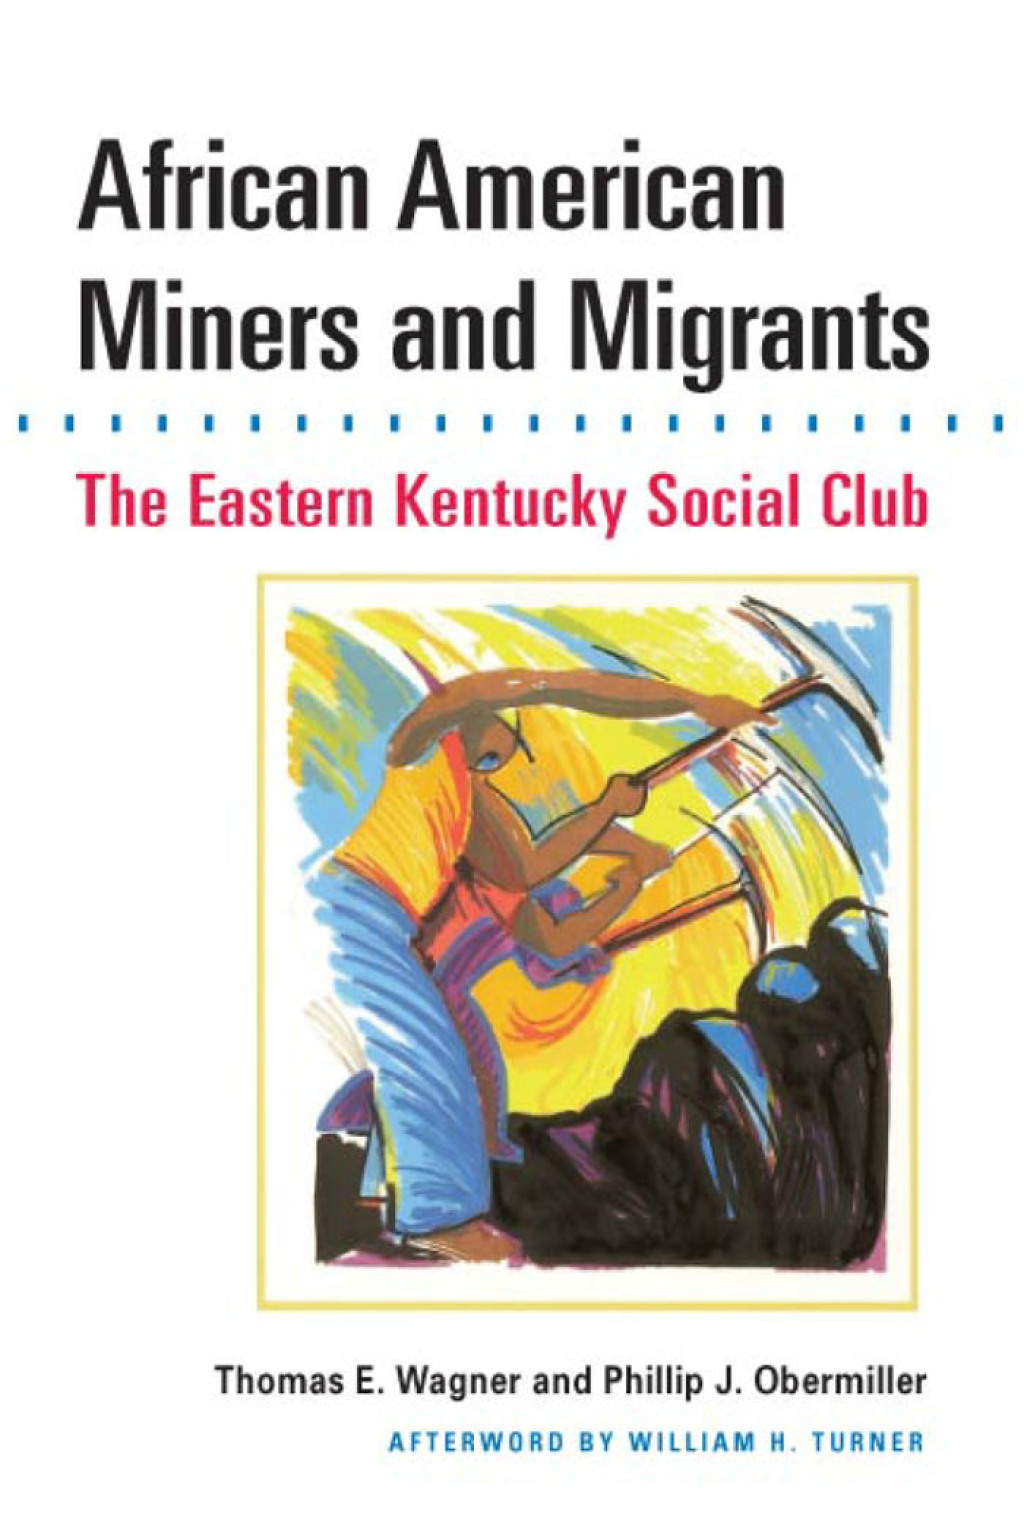 African American Miners and Migrants (eBook) - Thomas E. Wagner; Philip J. Obermiller,